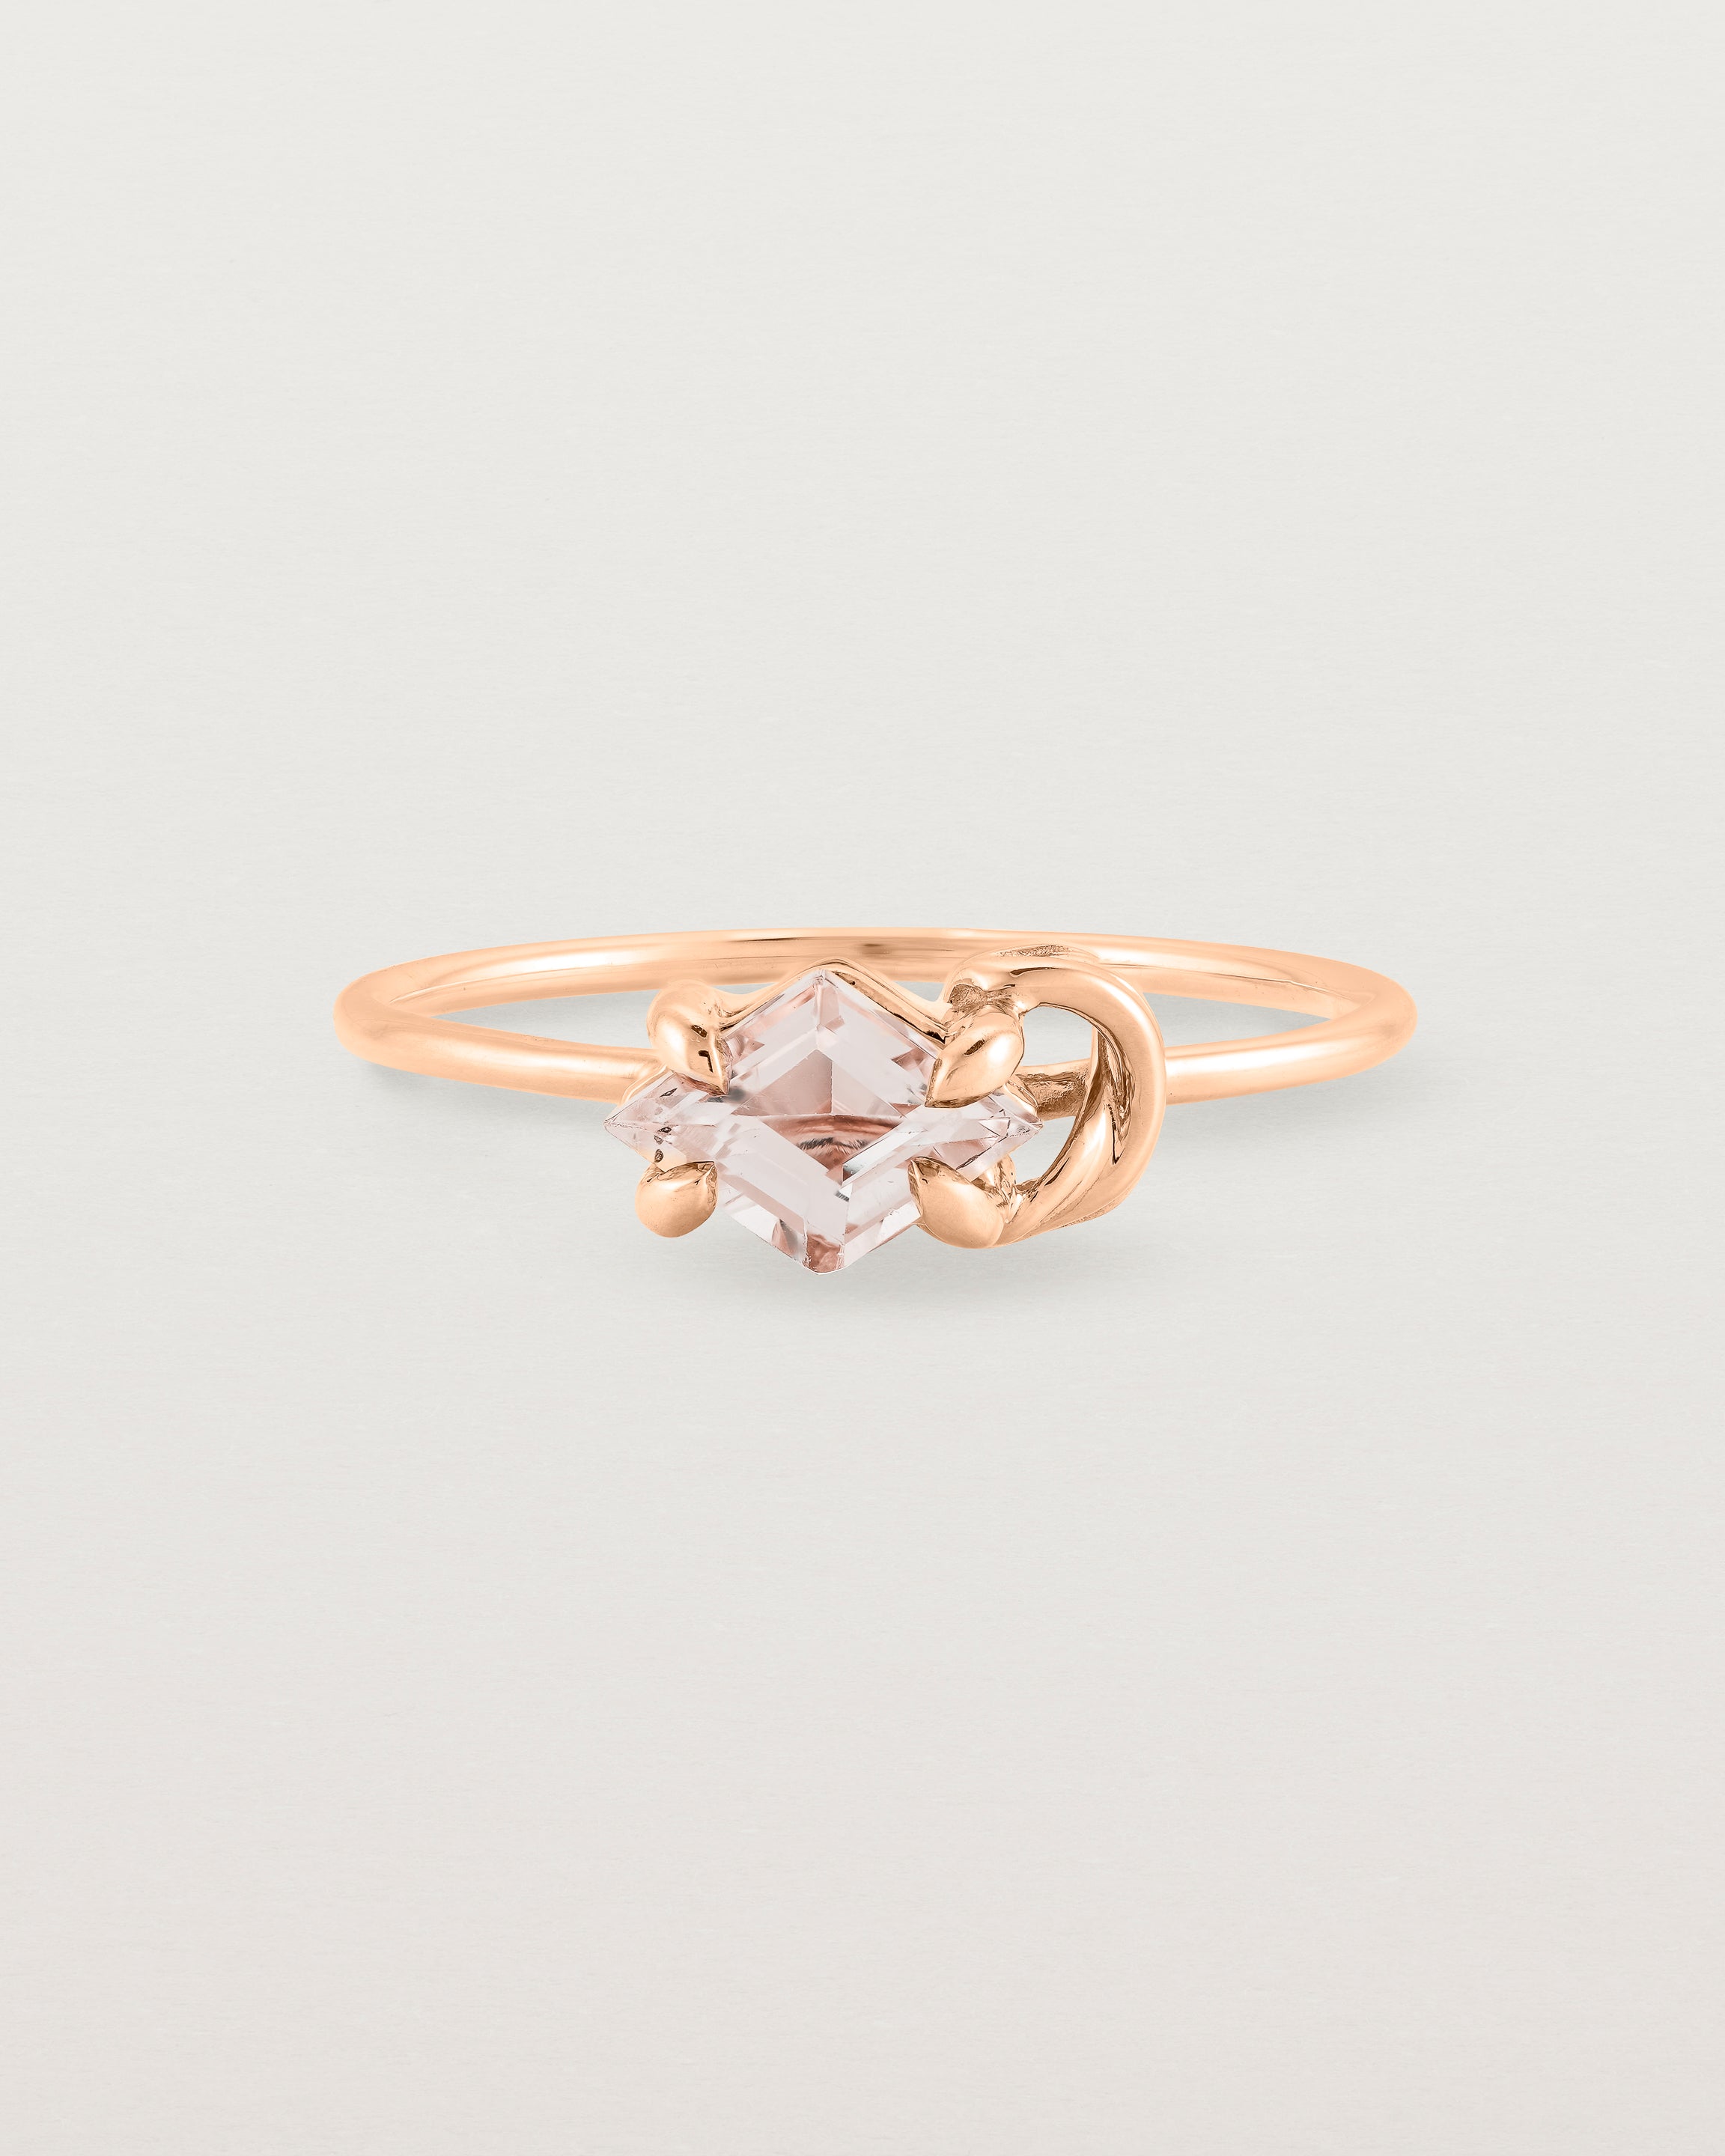 Front view of the Nuna Ring | Savannah Sunstone in Rose Gold.